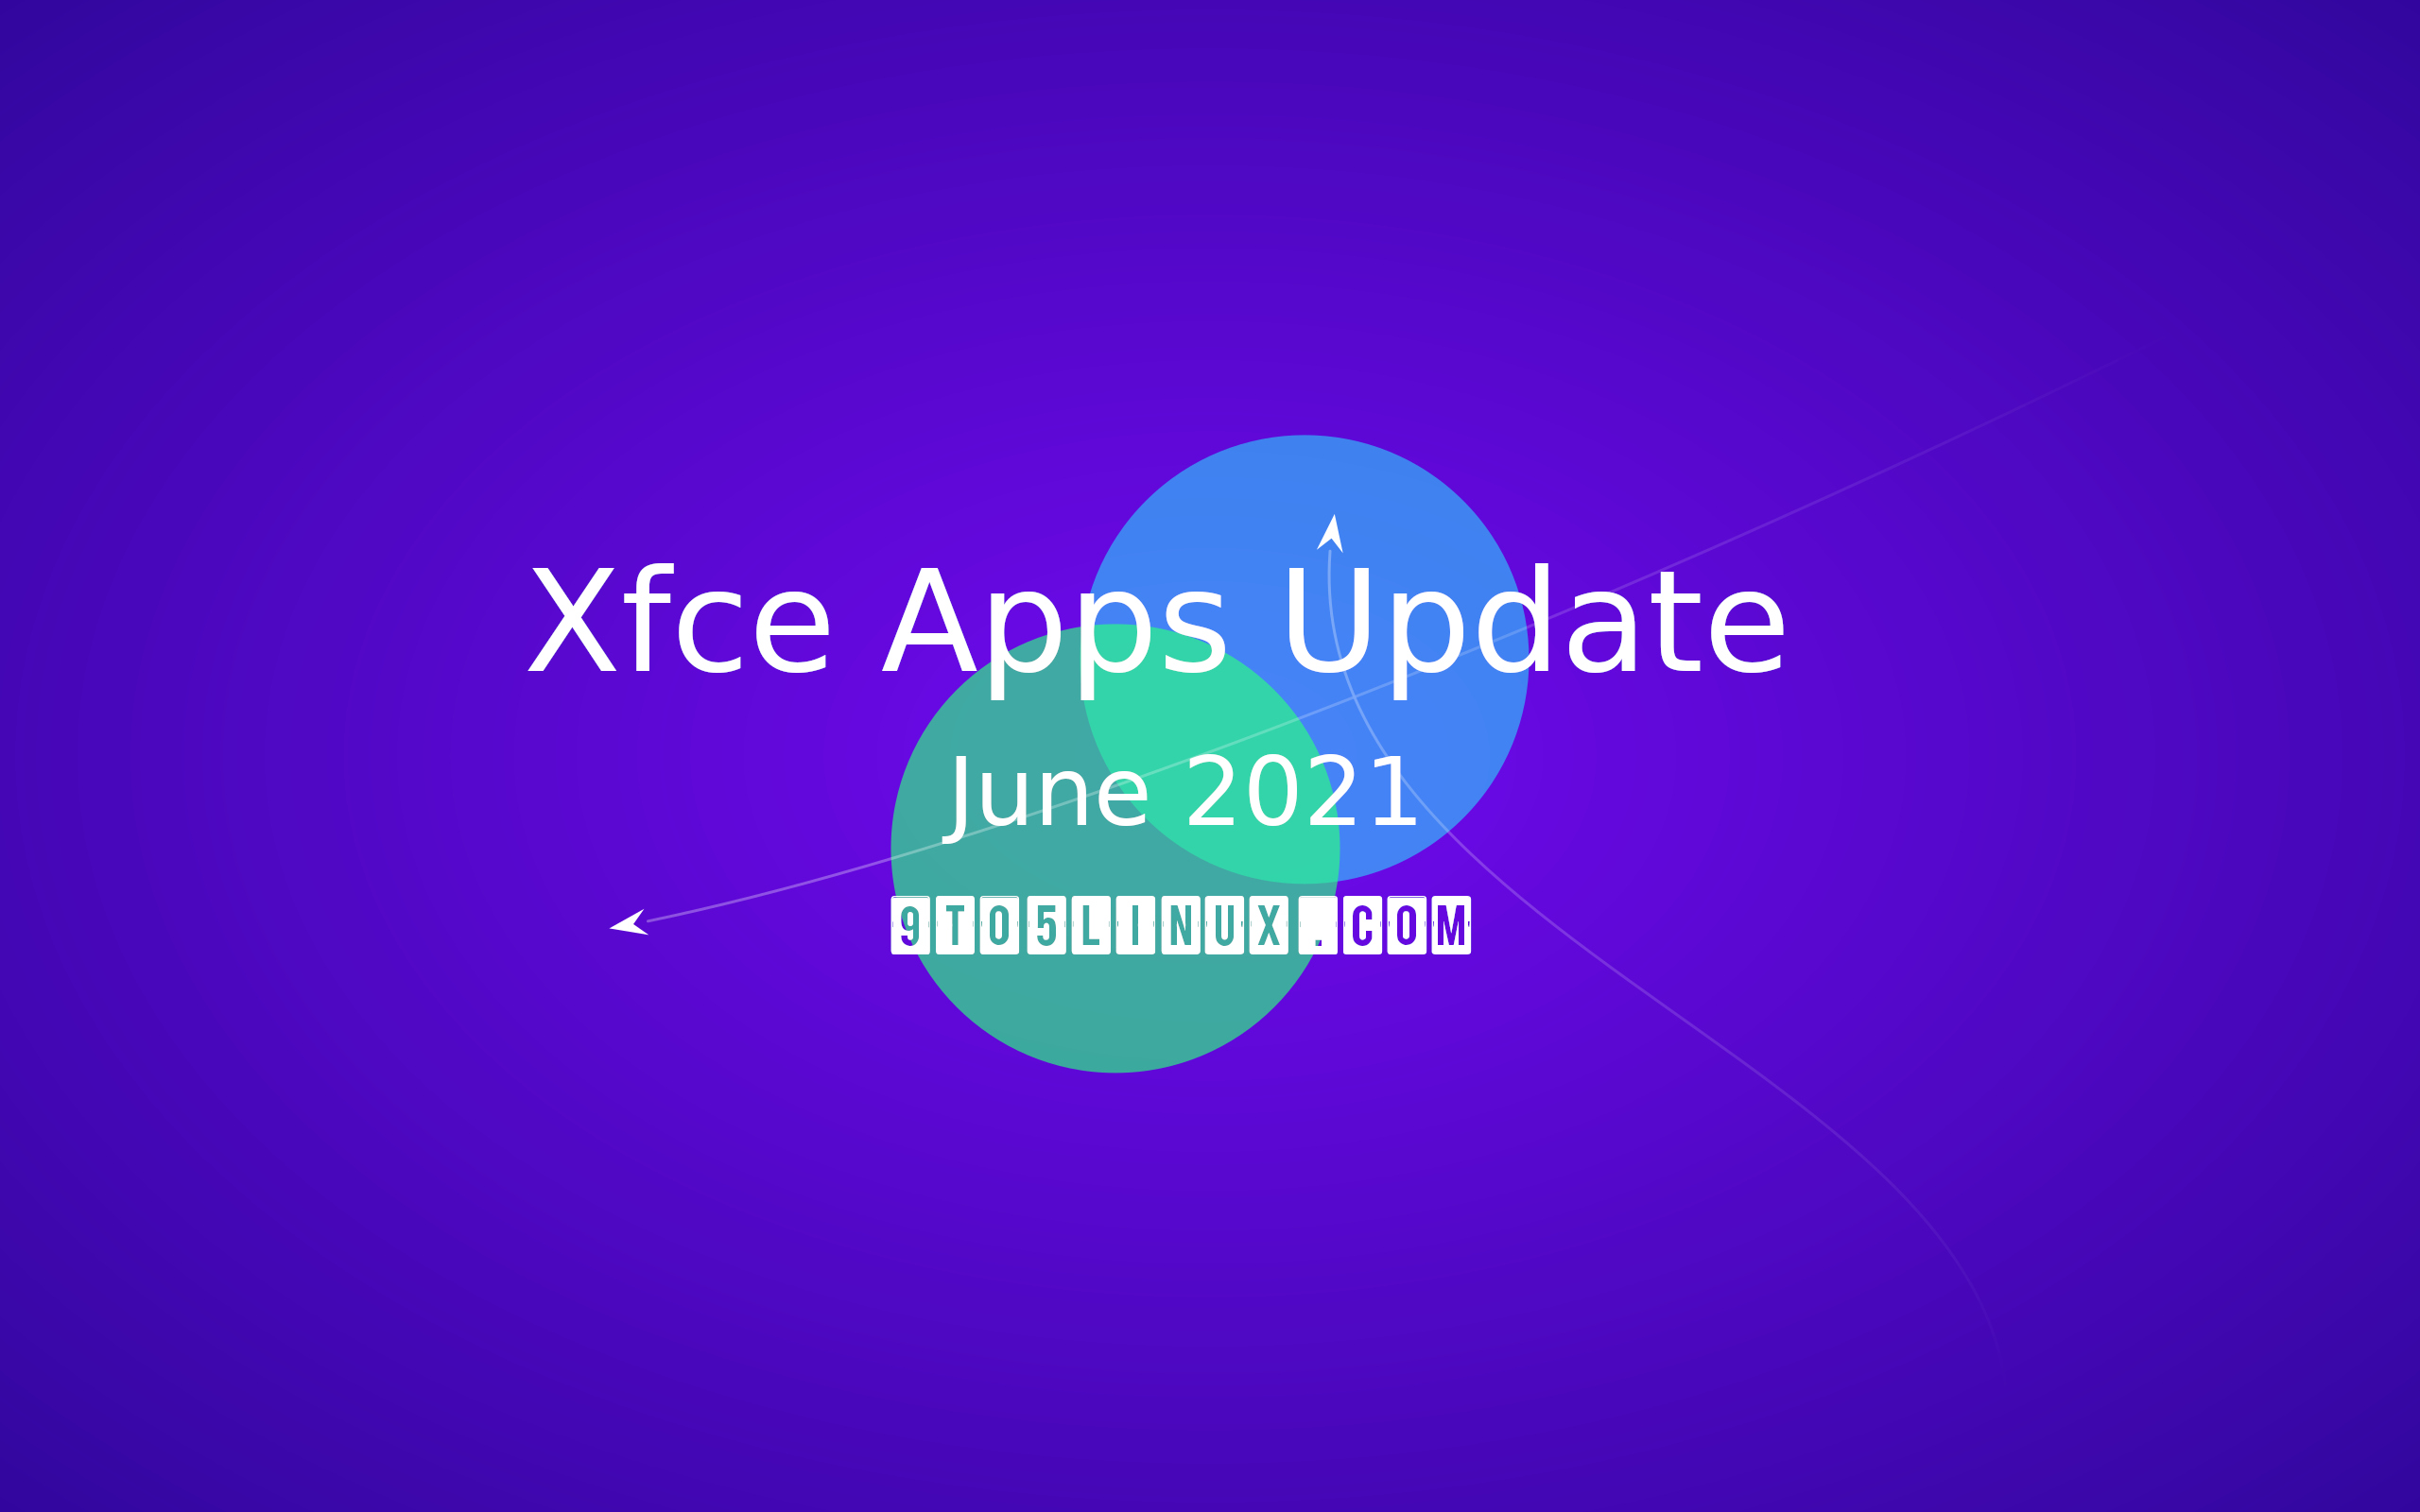 Xfce’s Apps Update for June 2021 Brings New Releases of Ristretto, Xfce Settings, and More